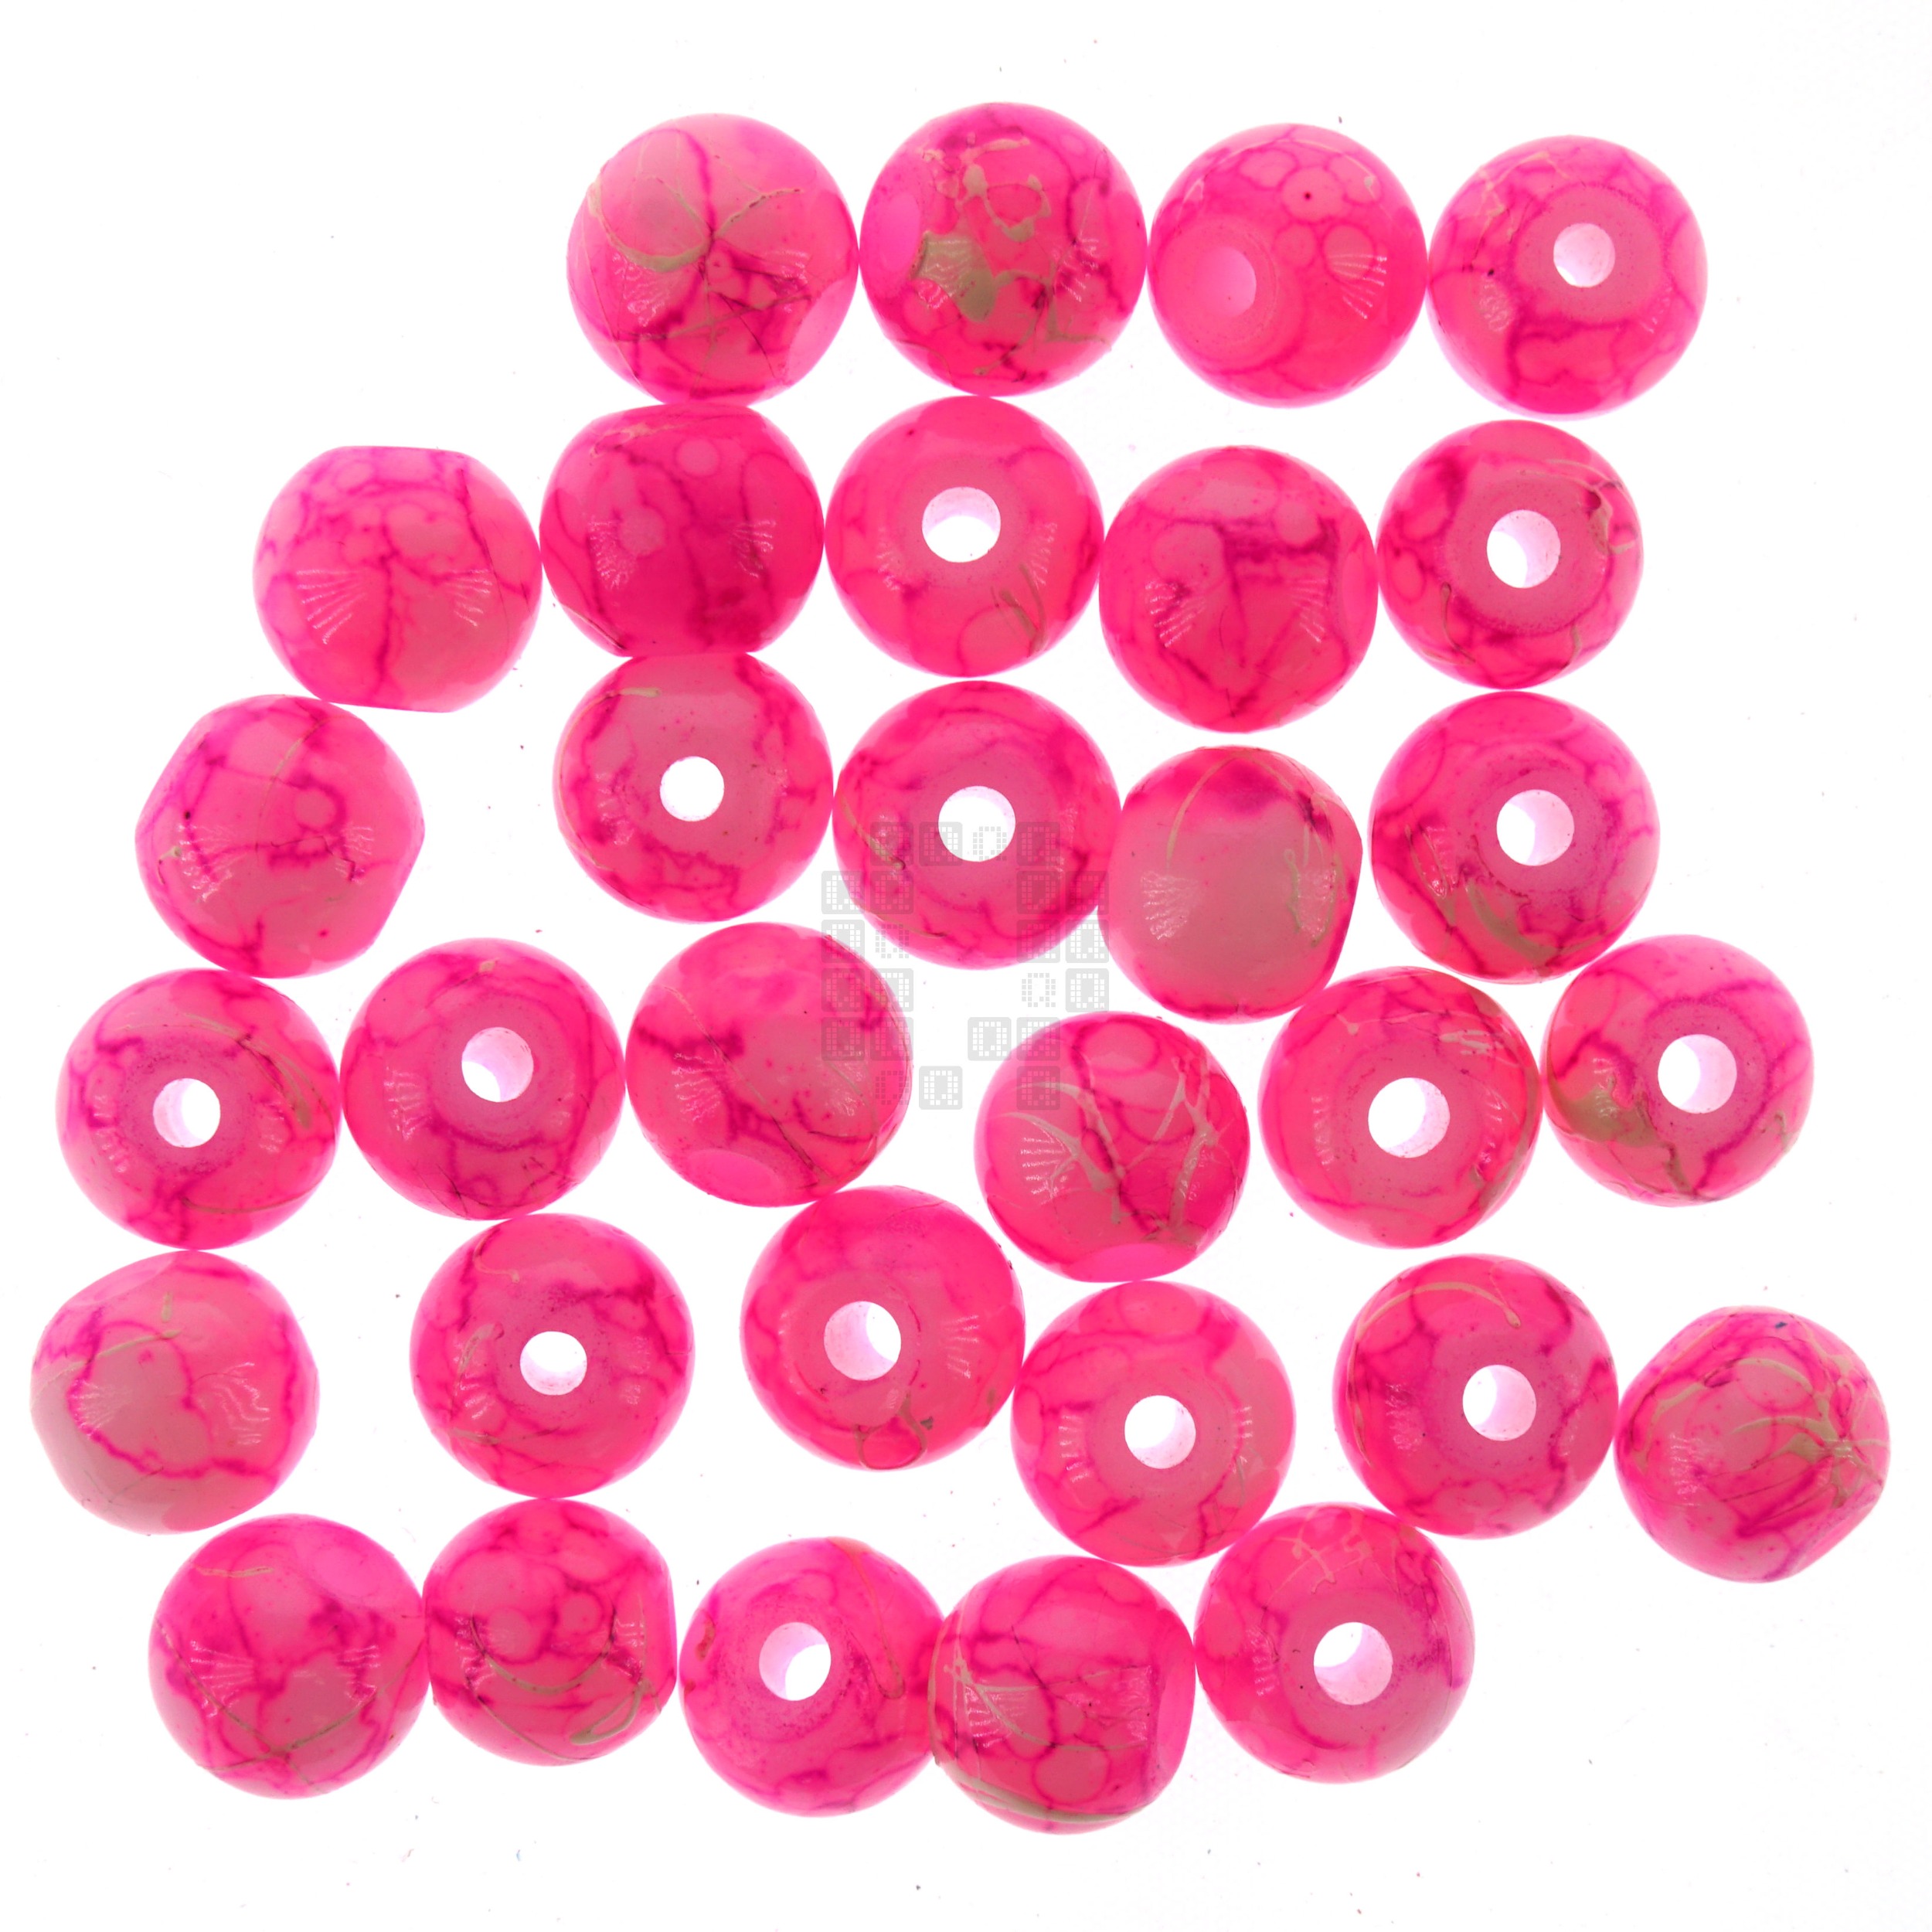 Cherry Blossom Pink 8mm Loose Glass Beads, 30 Pieces